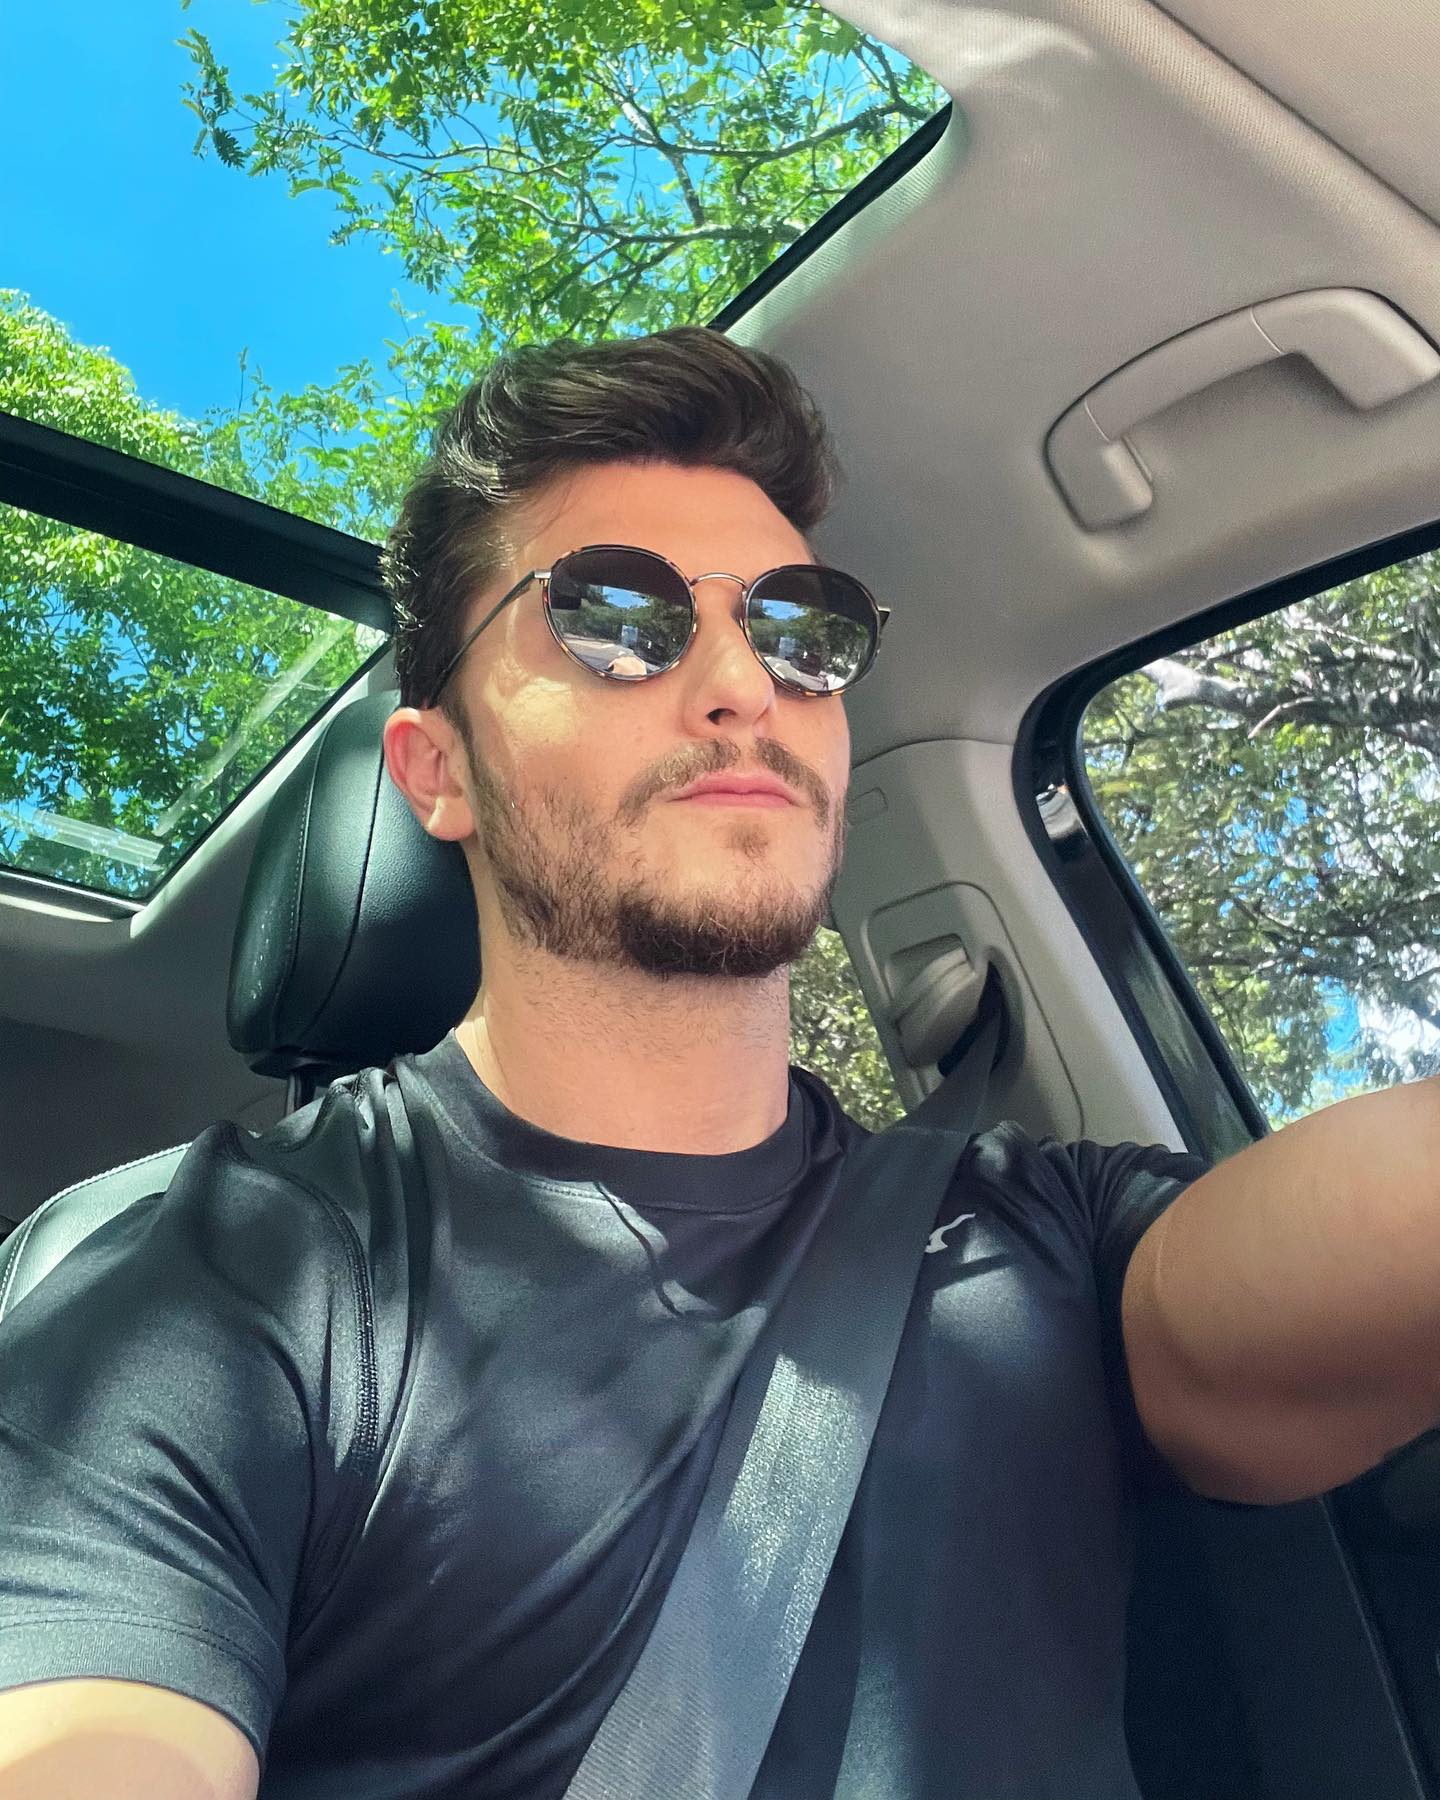 https://e.radikal.host/2023/04/20/Photo-by-Klebber-Toledo-on-March-09-2023.-May-be-a-selfie-of-1-person-beard-seatbelt-and-sunglasses..jpg